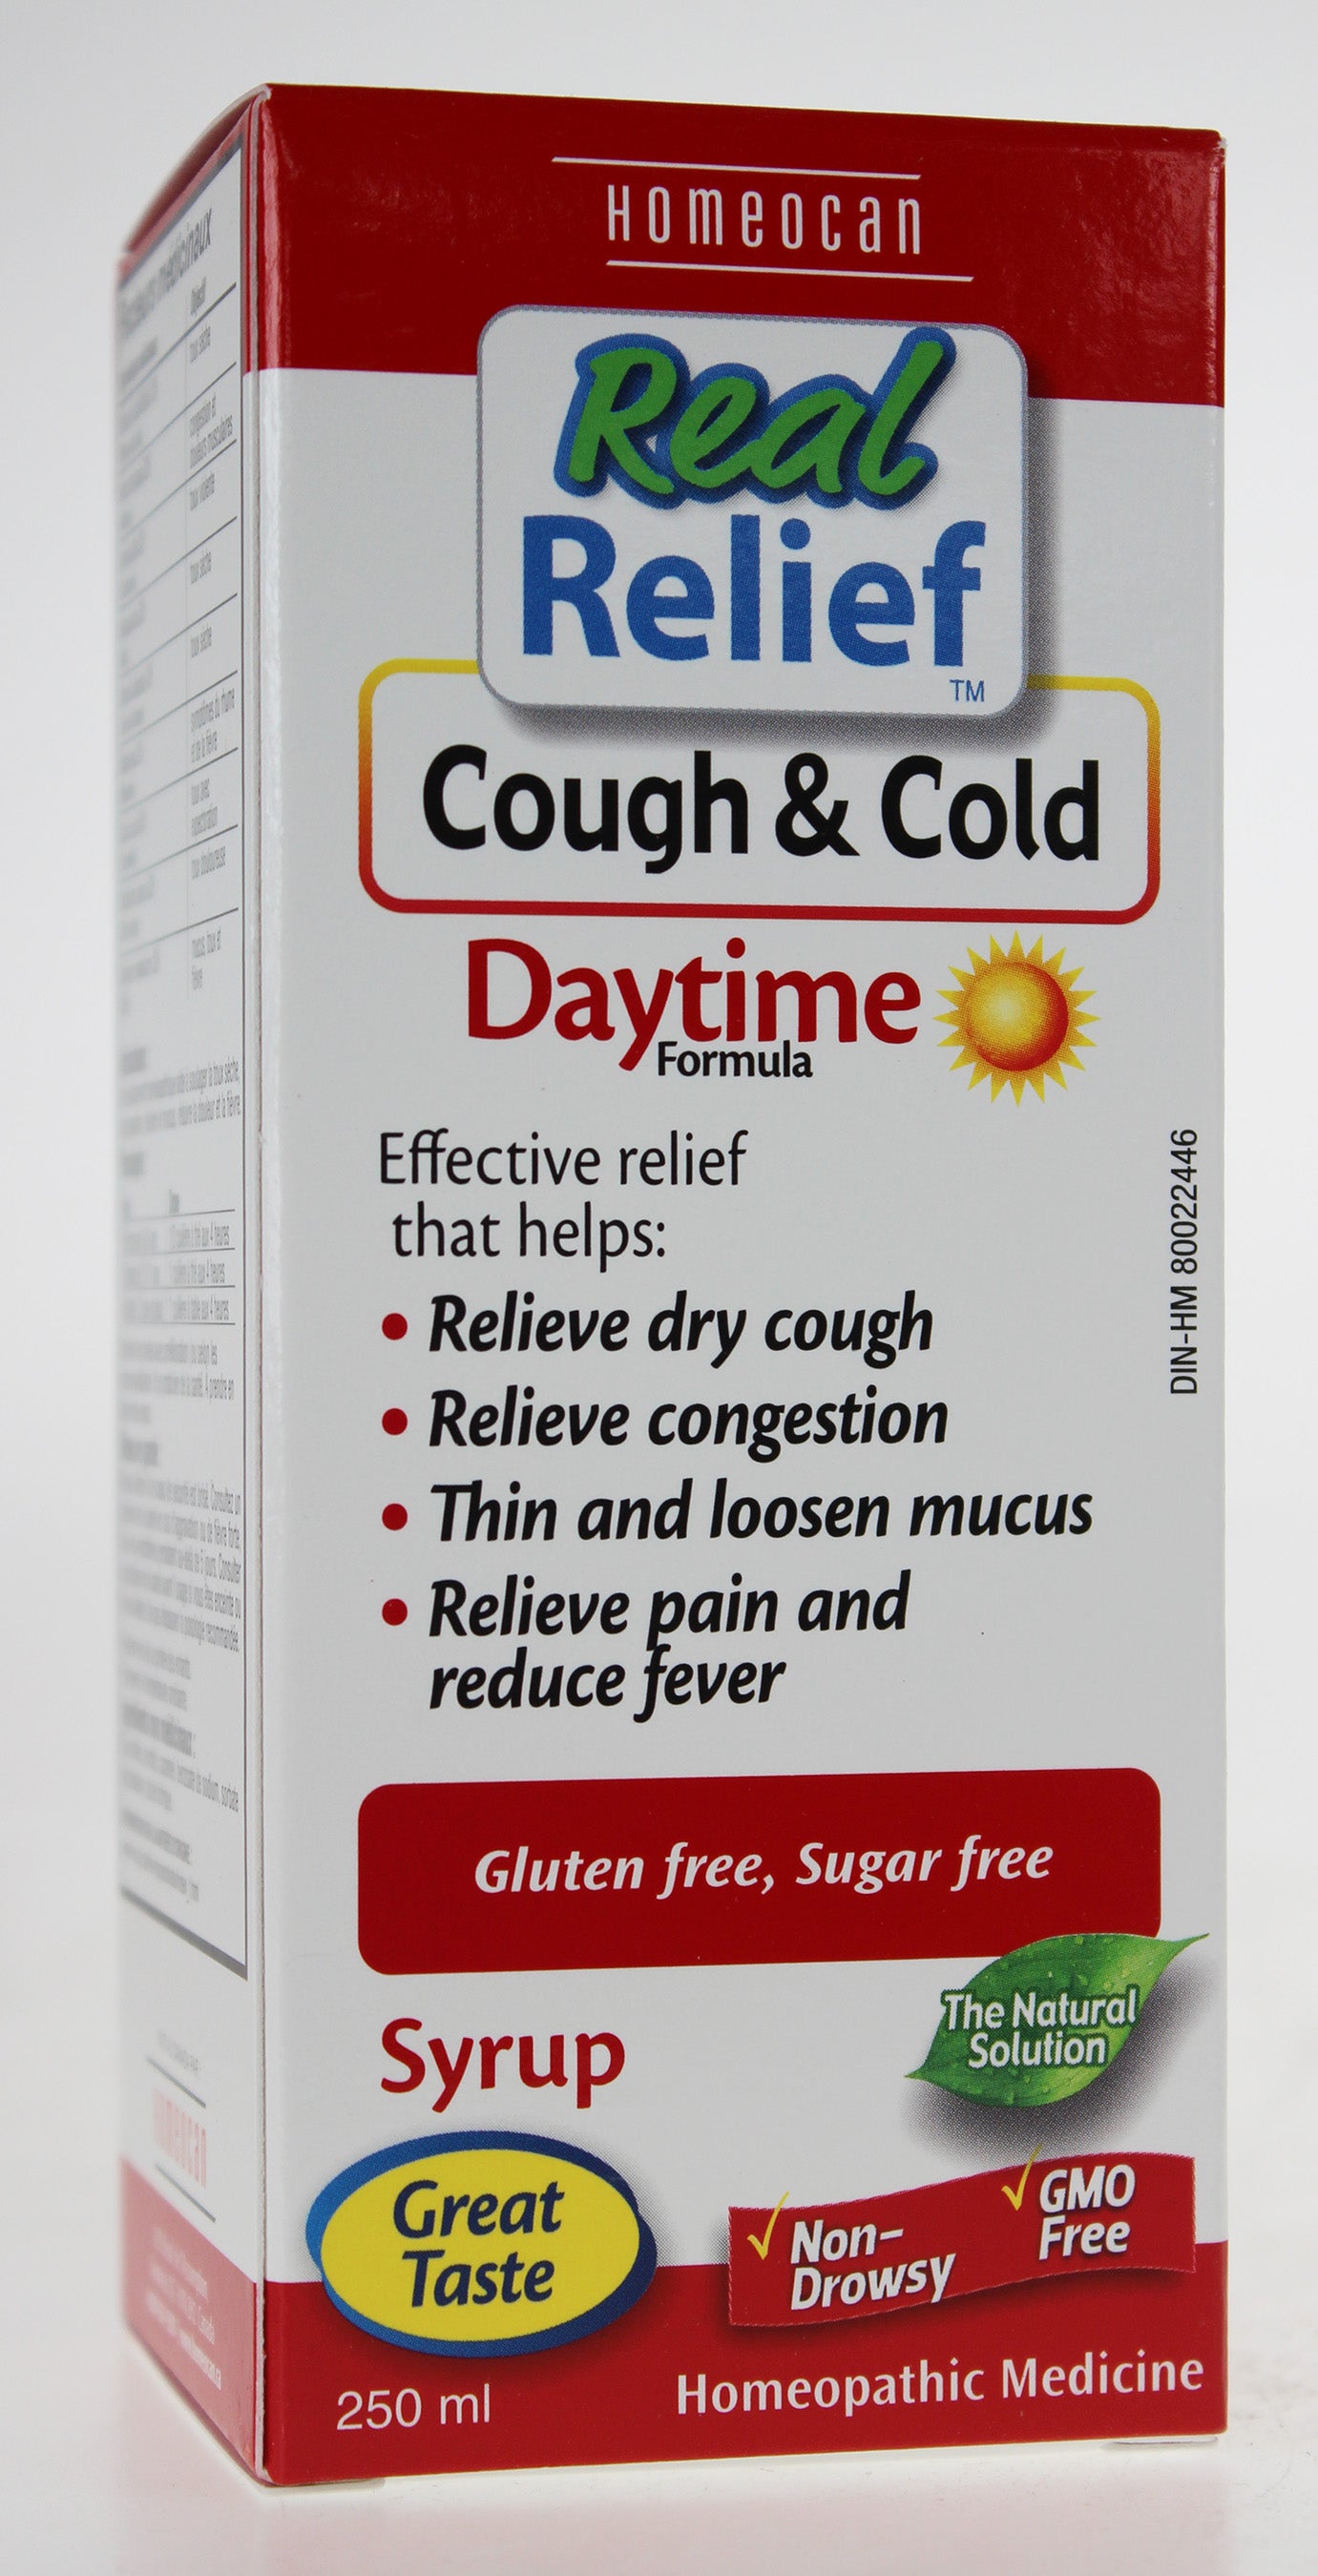 Real Relief Cough & Cold Daytime